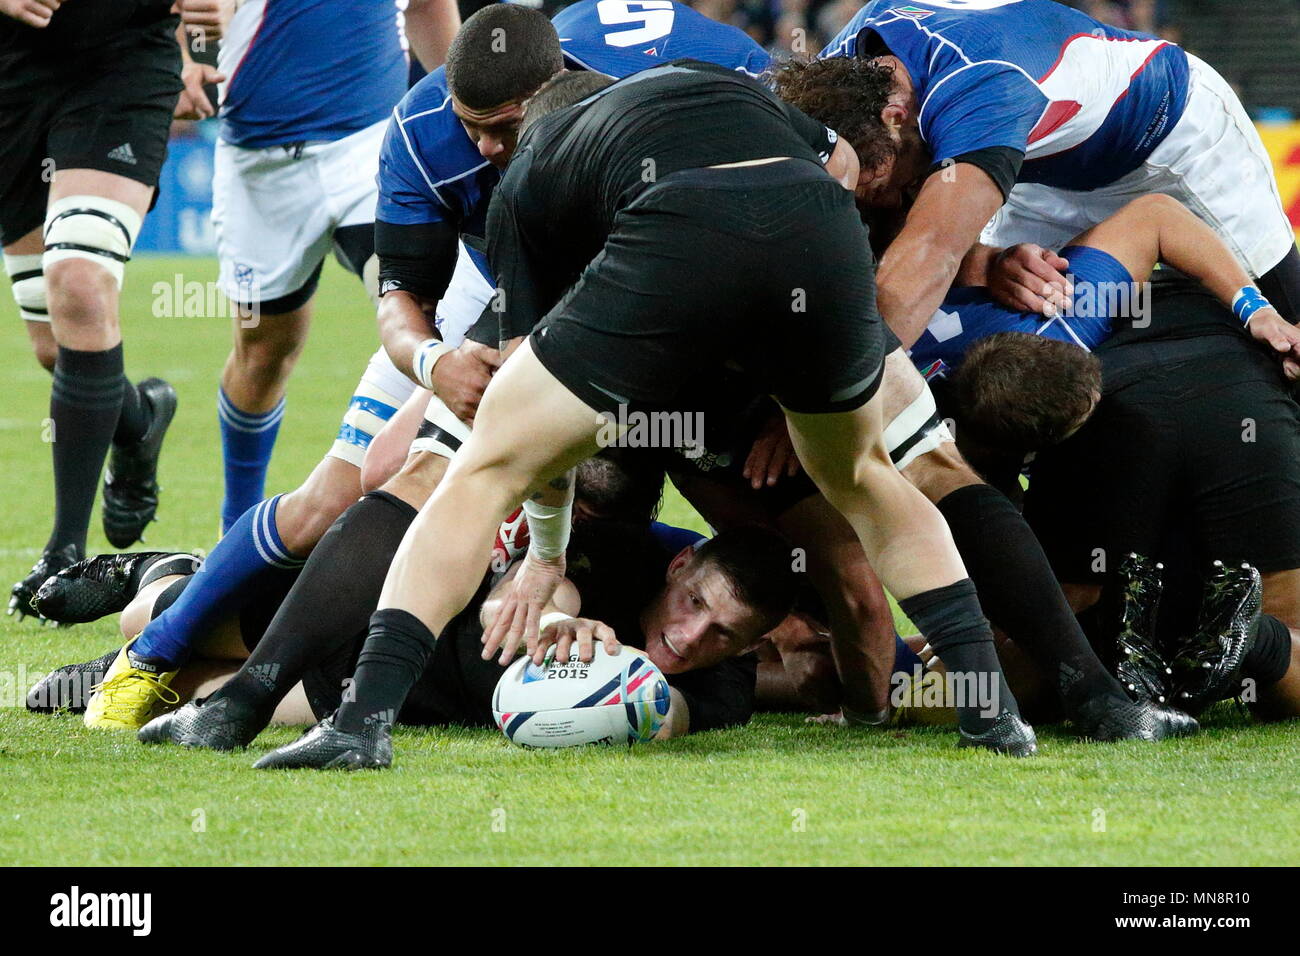 Colin Slade of NZL All Blacks feeds the ball during the IRB RWC 2015 match between New Zealand All Blacks v Namibia- Pool C Match 12 at The Stadium, Queen Elizabeth Olympic Park. London, England. 24 September 2015 Stock Photo